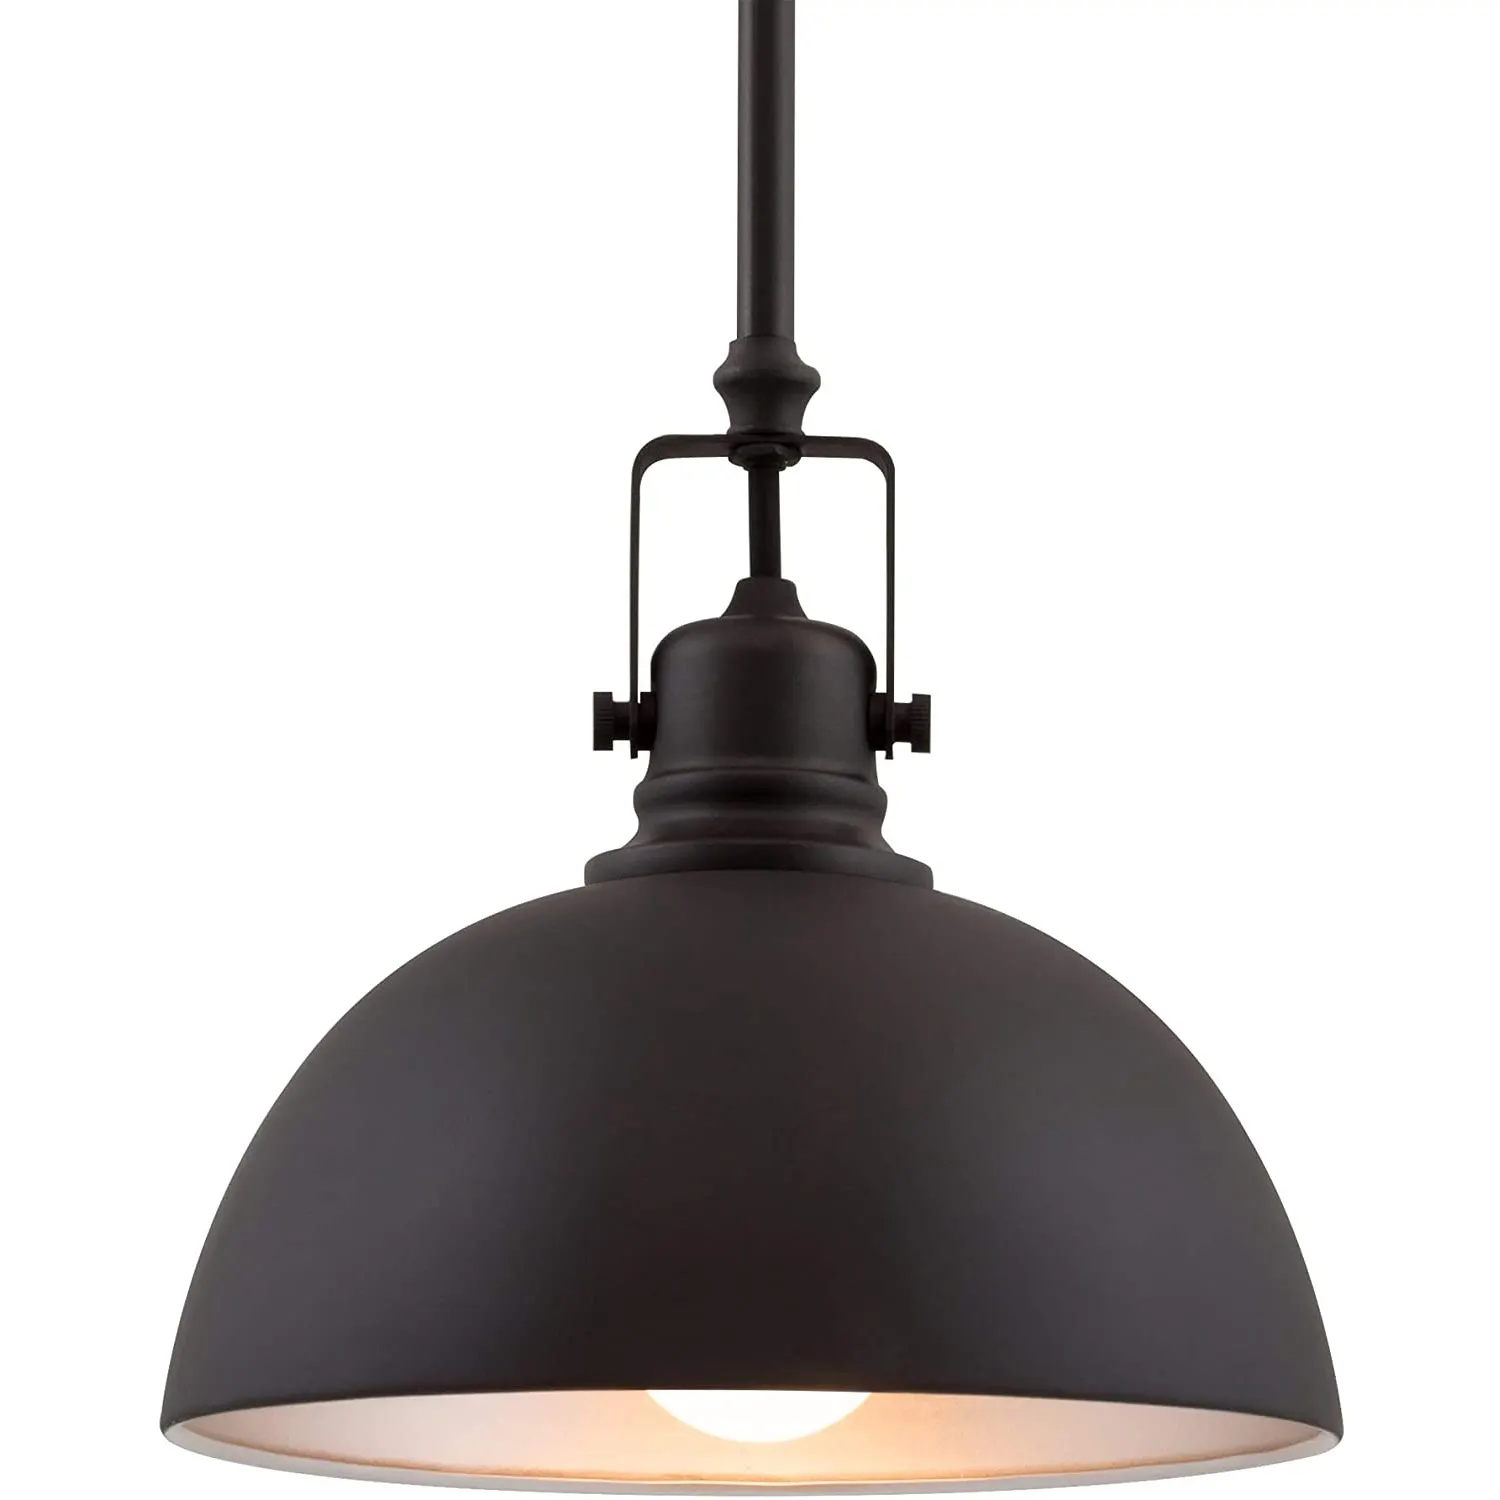 Contemporary Industrial 1-Light Pendant Light, Adjustable Length + Shade Swivel Joint, Oil-Rubbed Bronze Finish